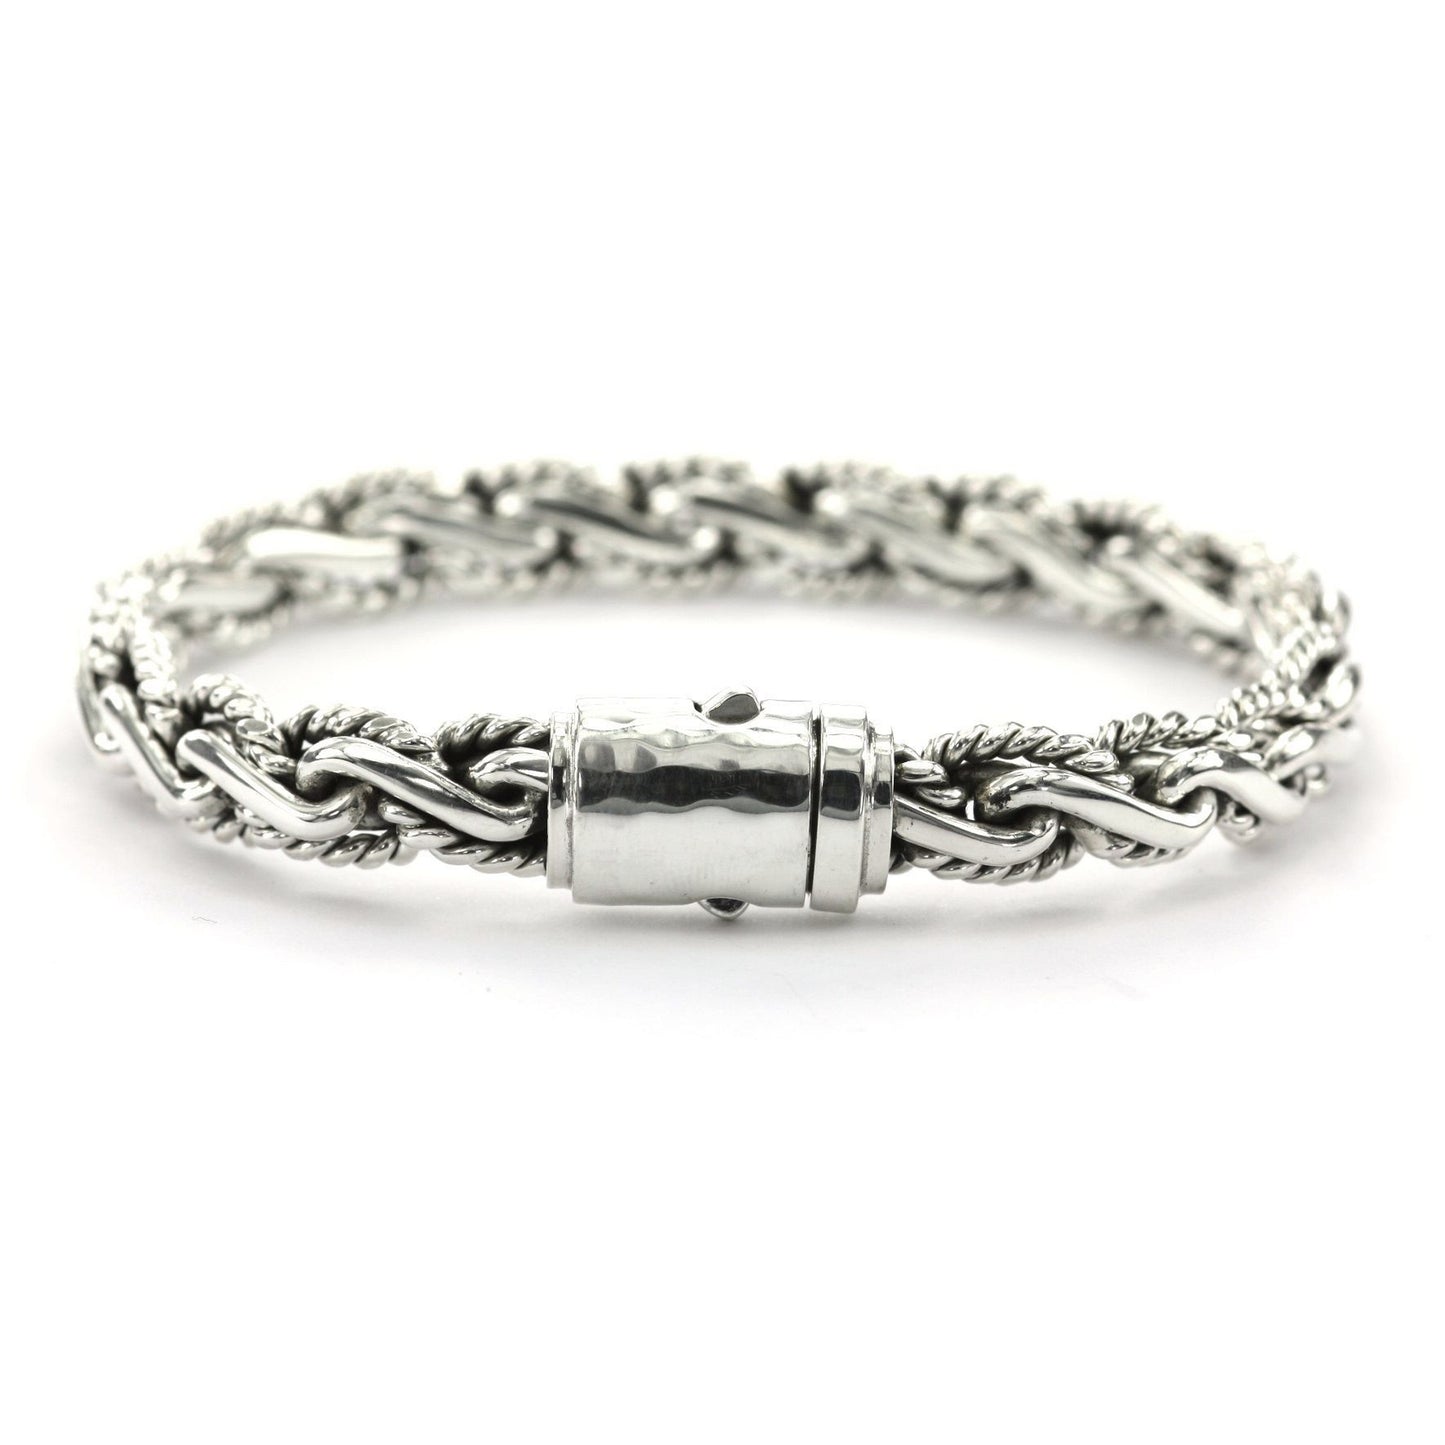 B209 LIMITED .925 Sterling Silver Chain Bracelet with Barrel Clasp